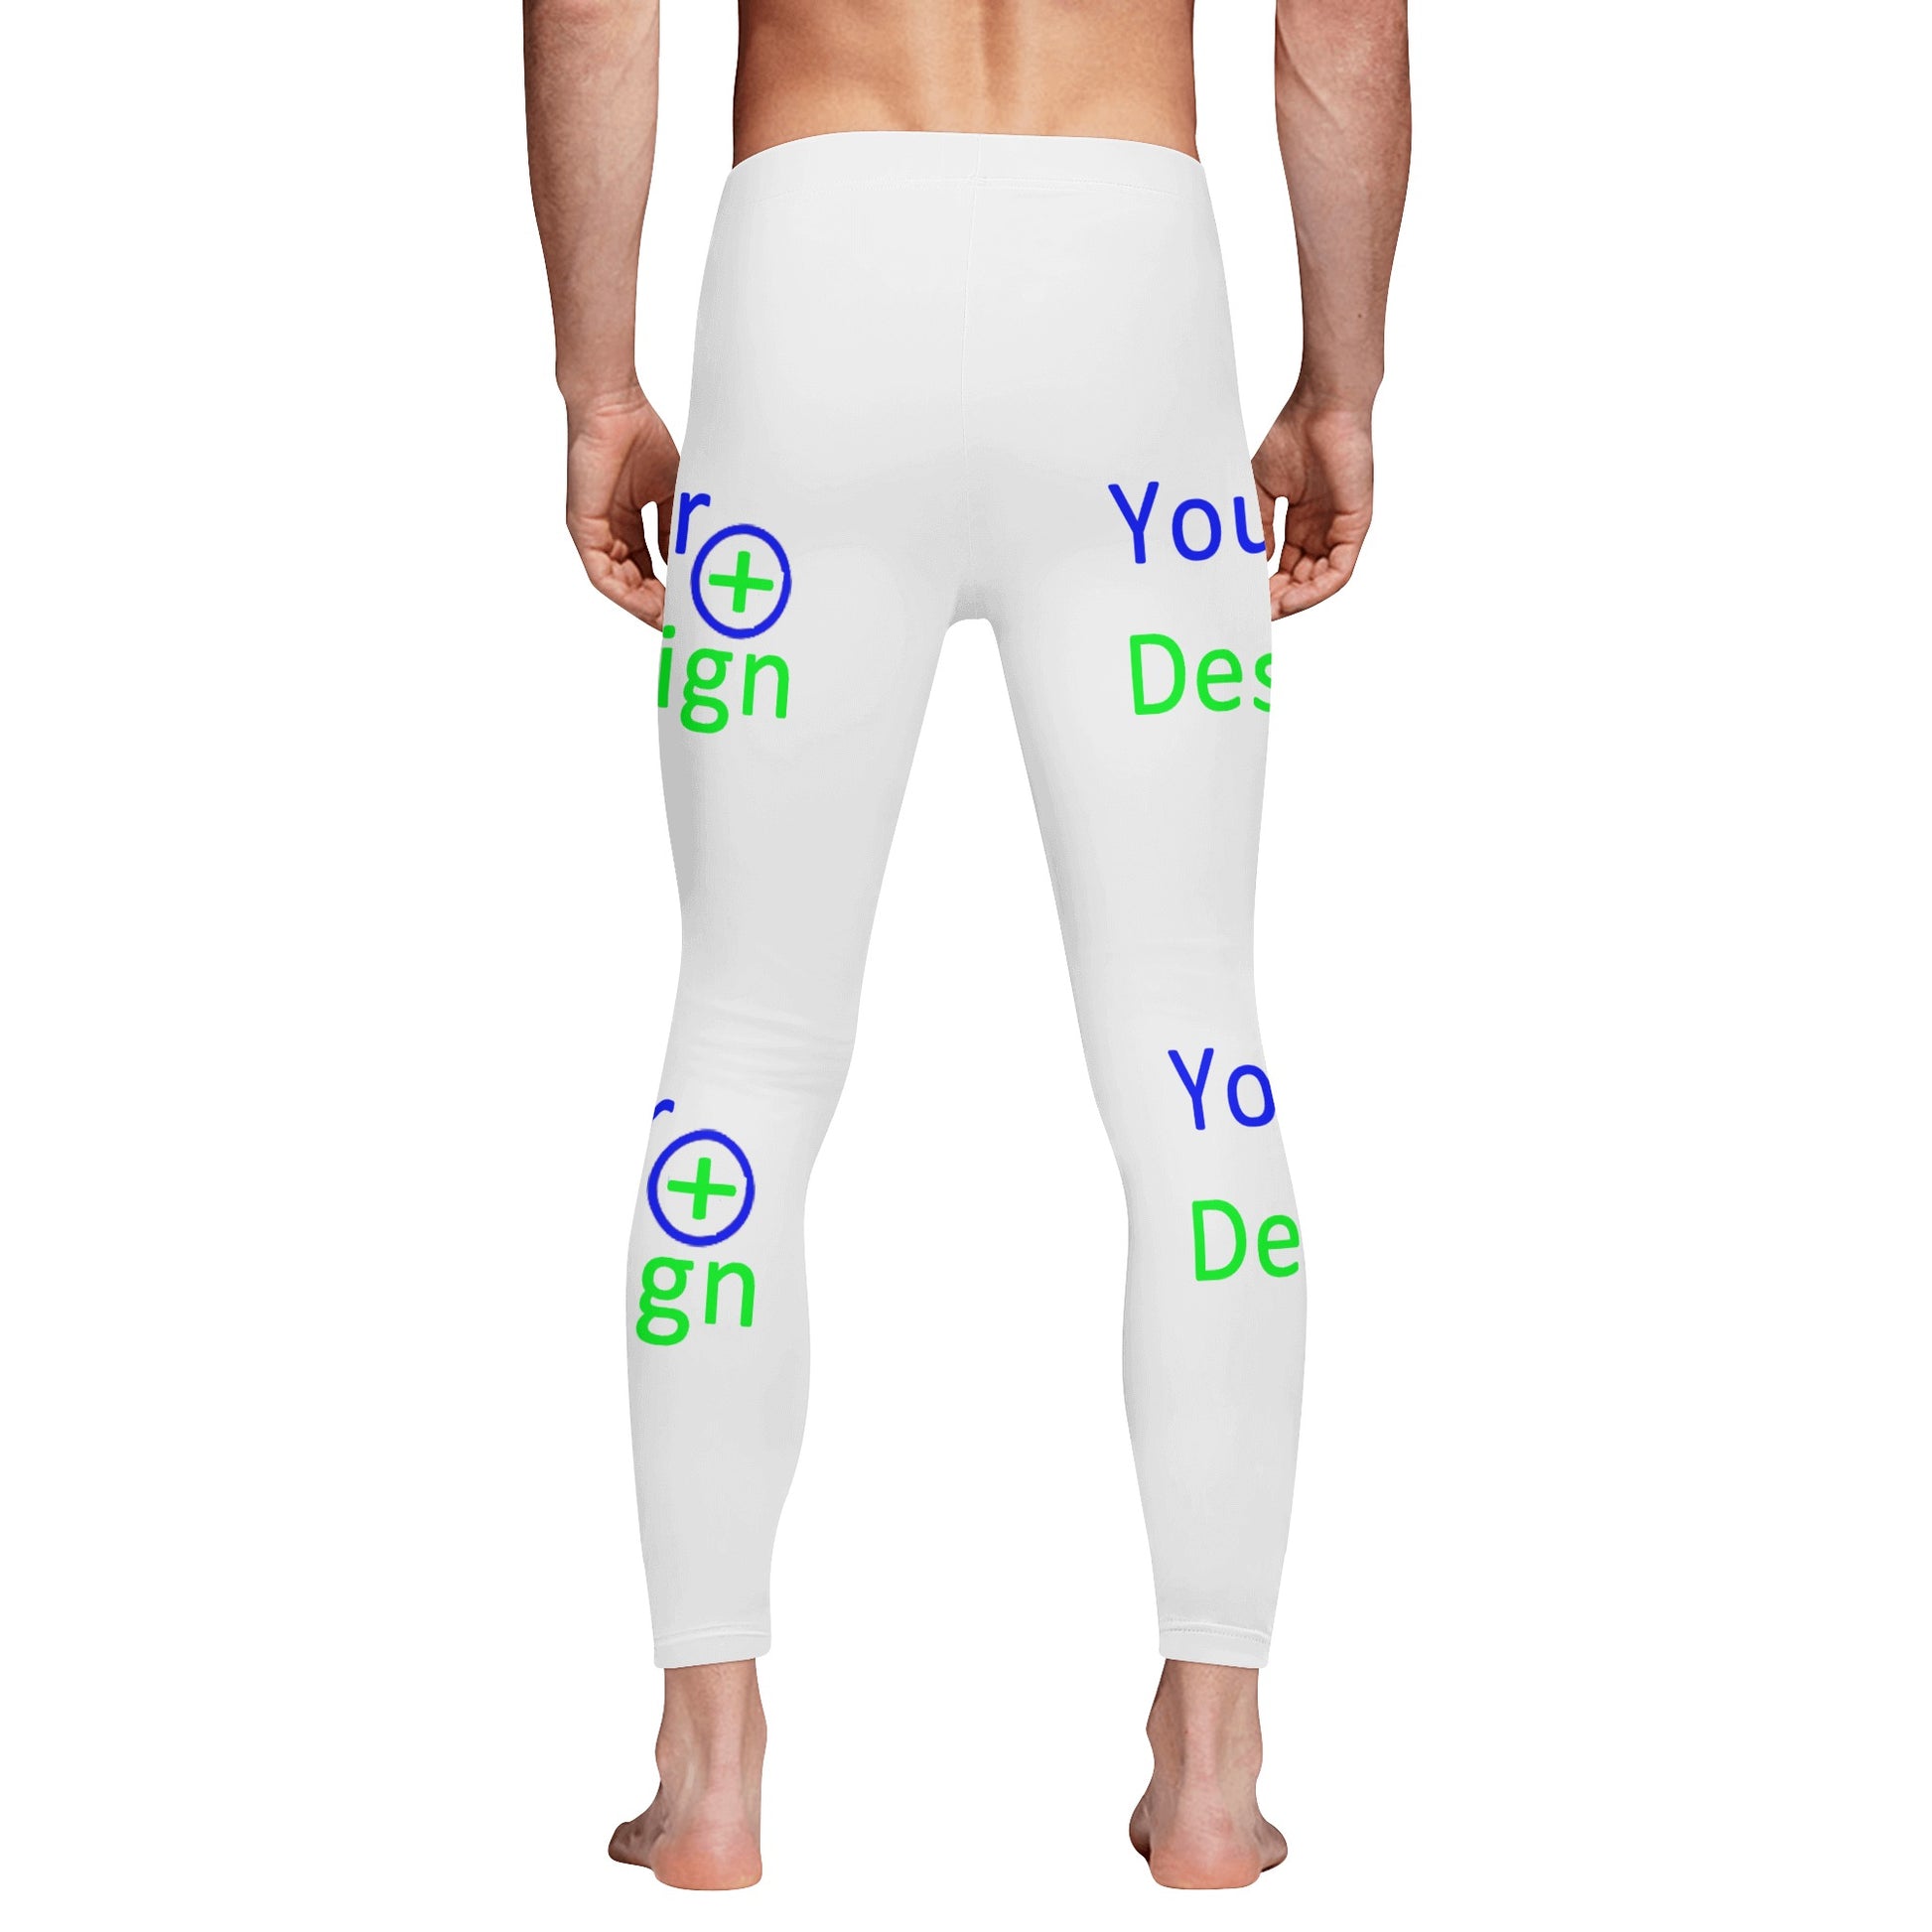 Mens All Over Print Sports Leggings & Running Tights - Customized 